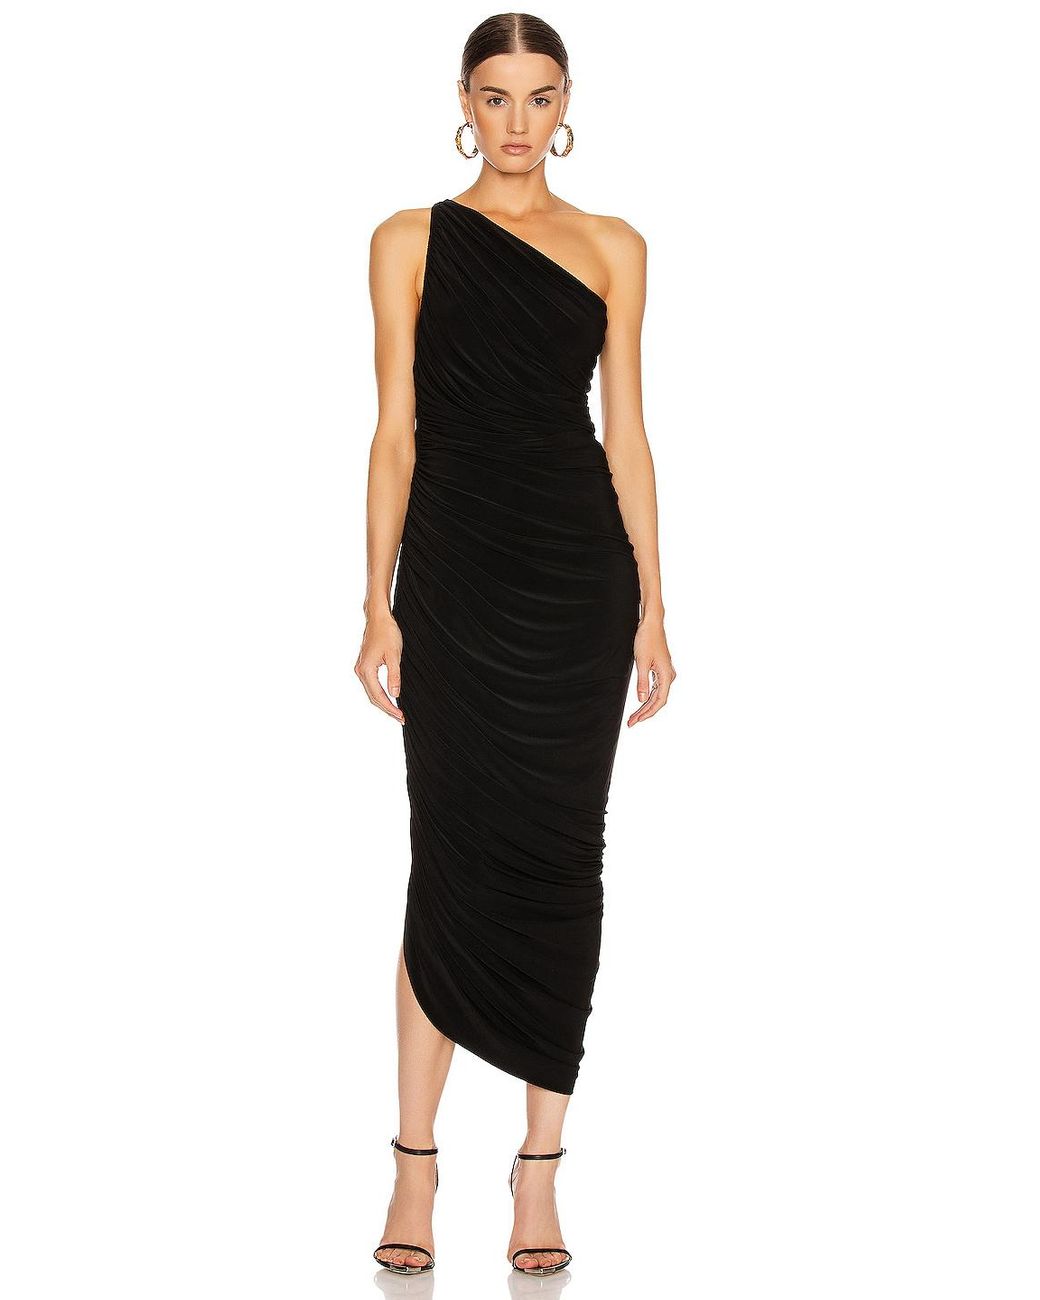 Norma Kamali Synthetic Diana Gown in Black - Lyst